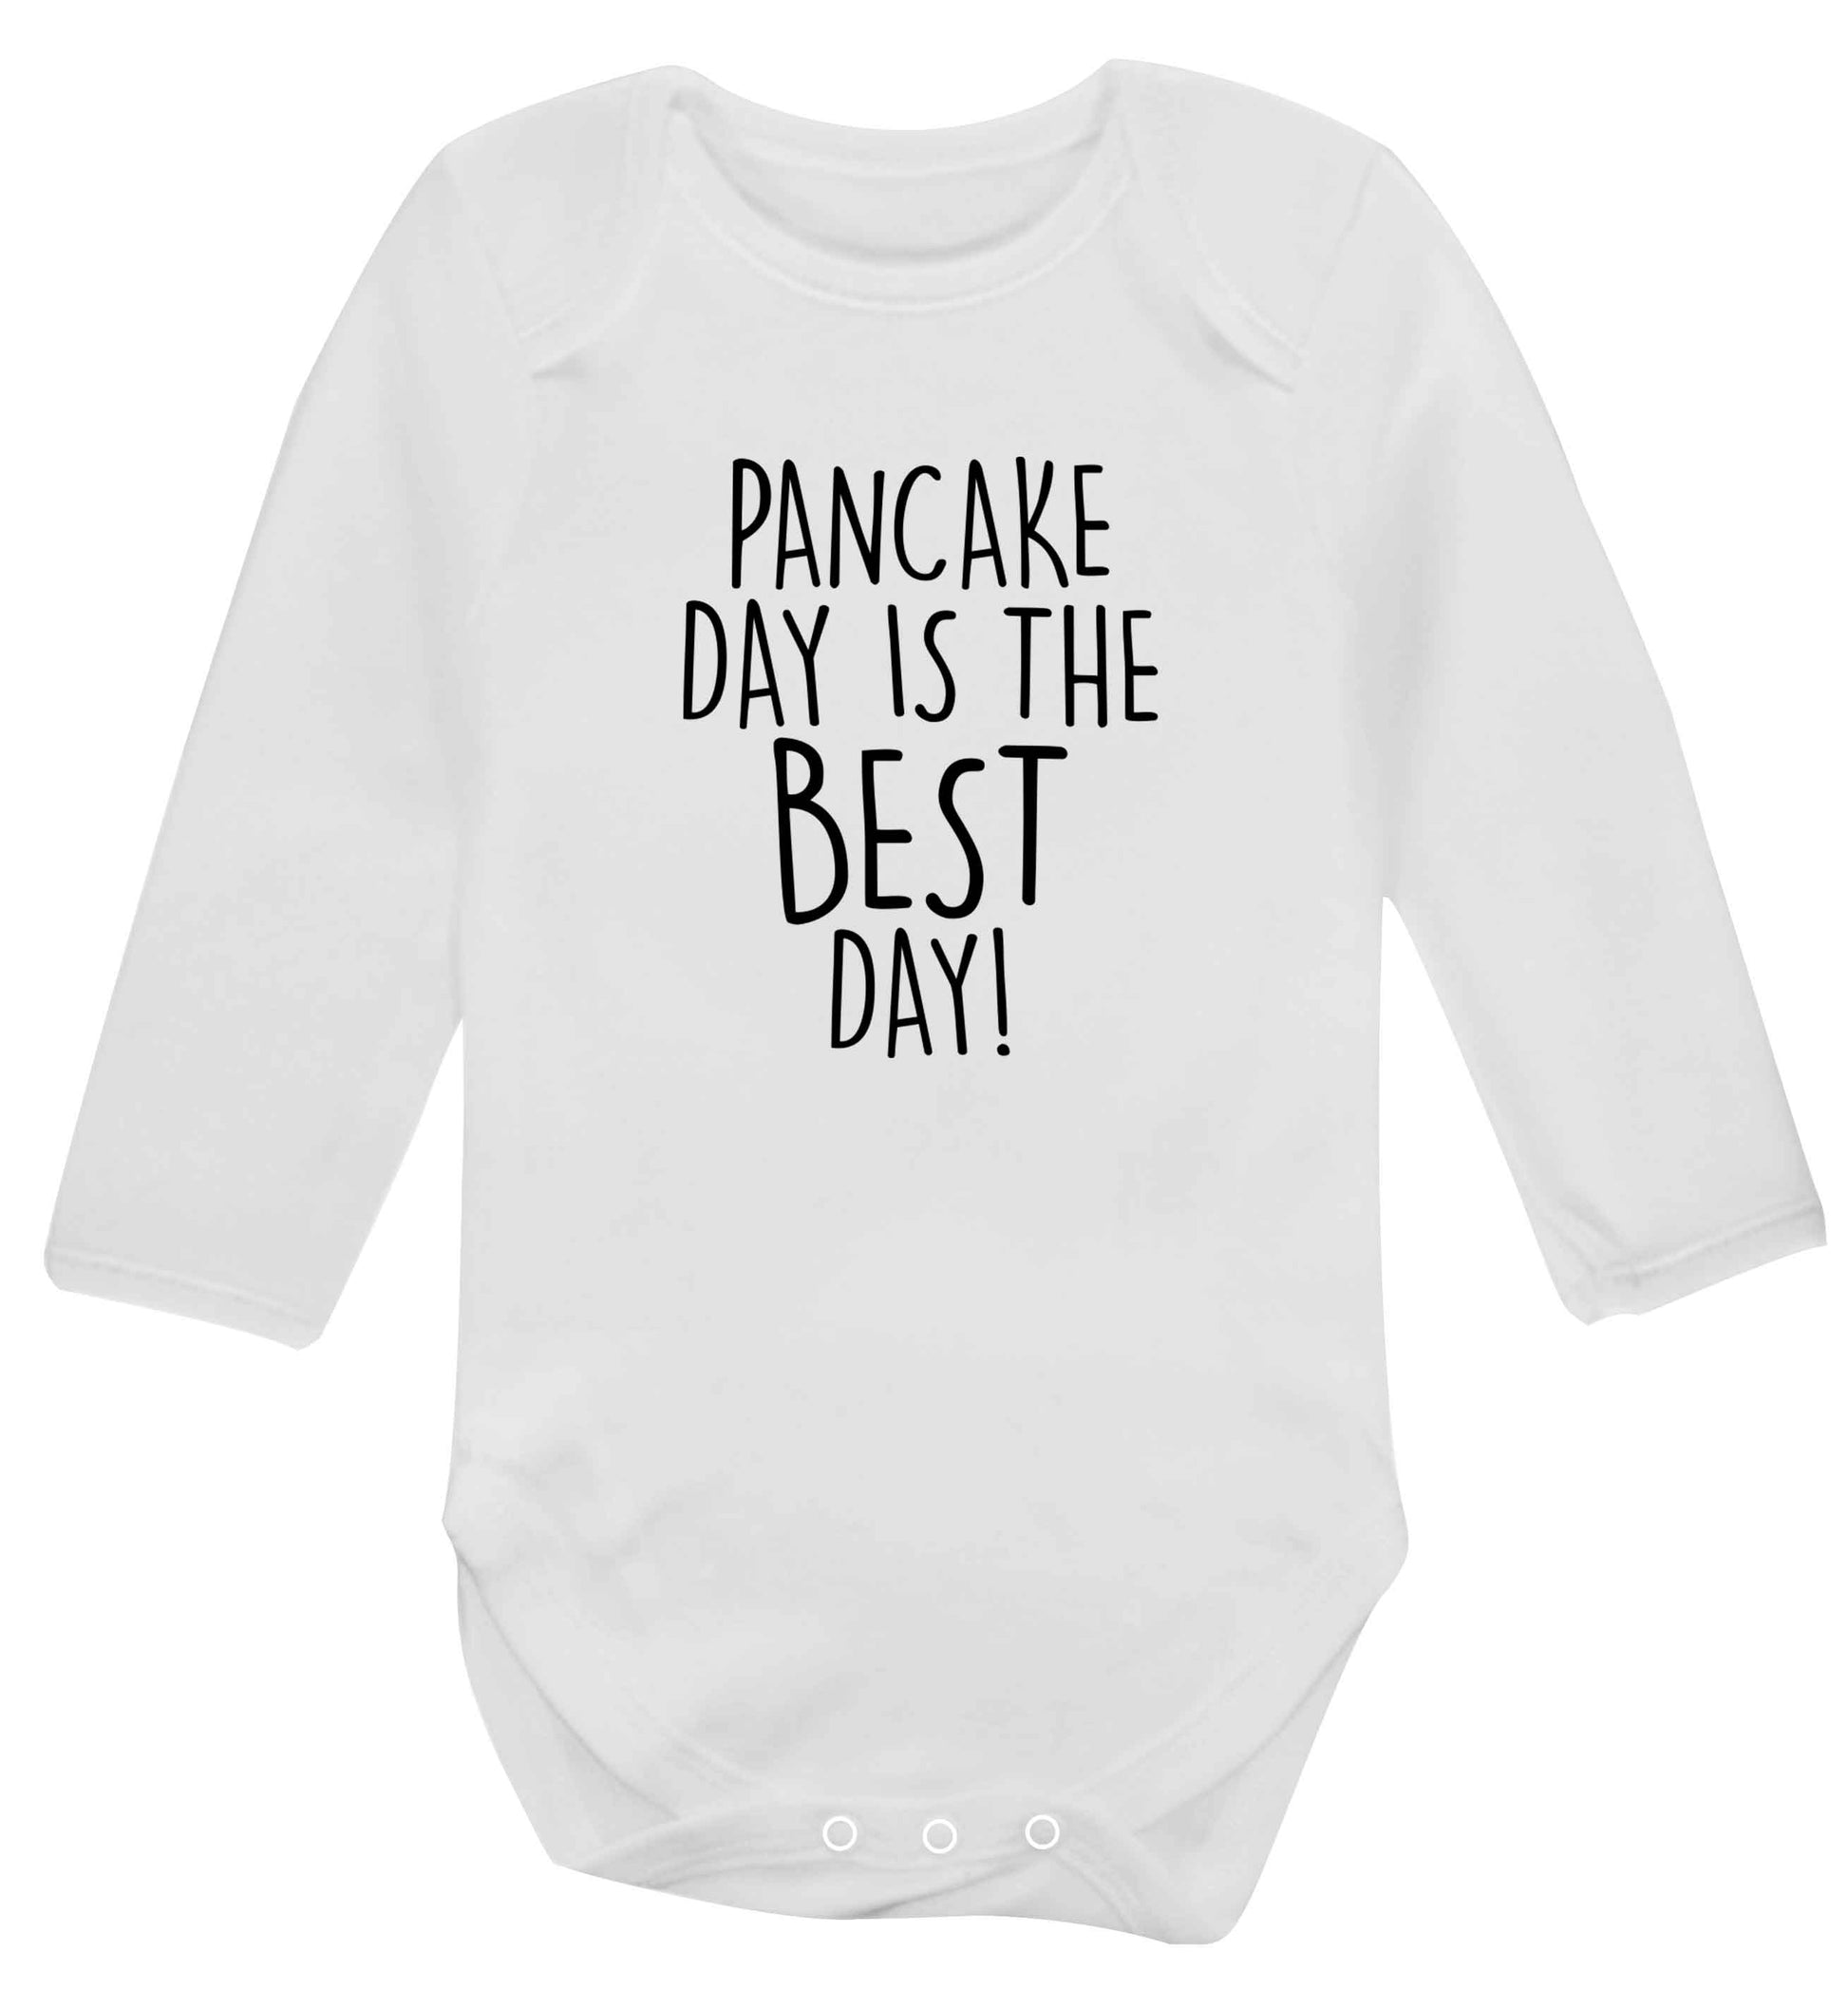 Pancake day is the best day baby vest long sleeved white 6-12 months